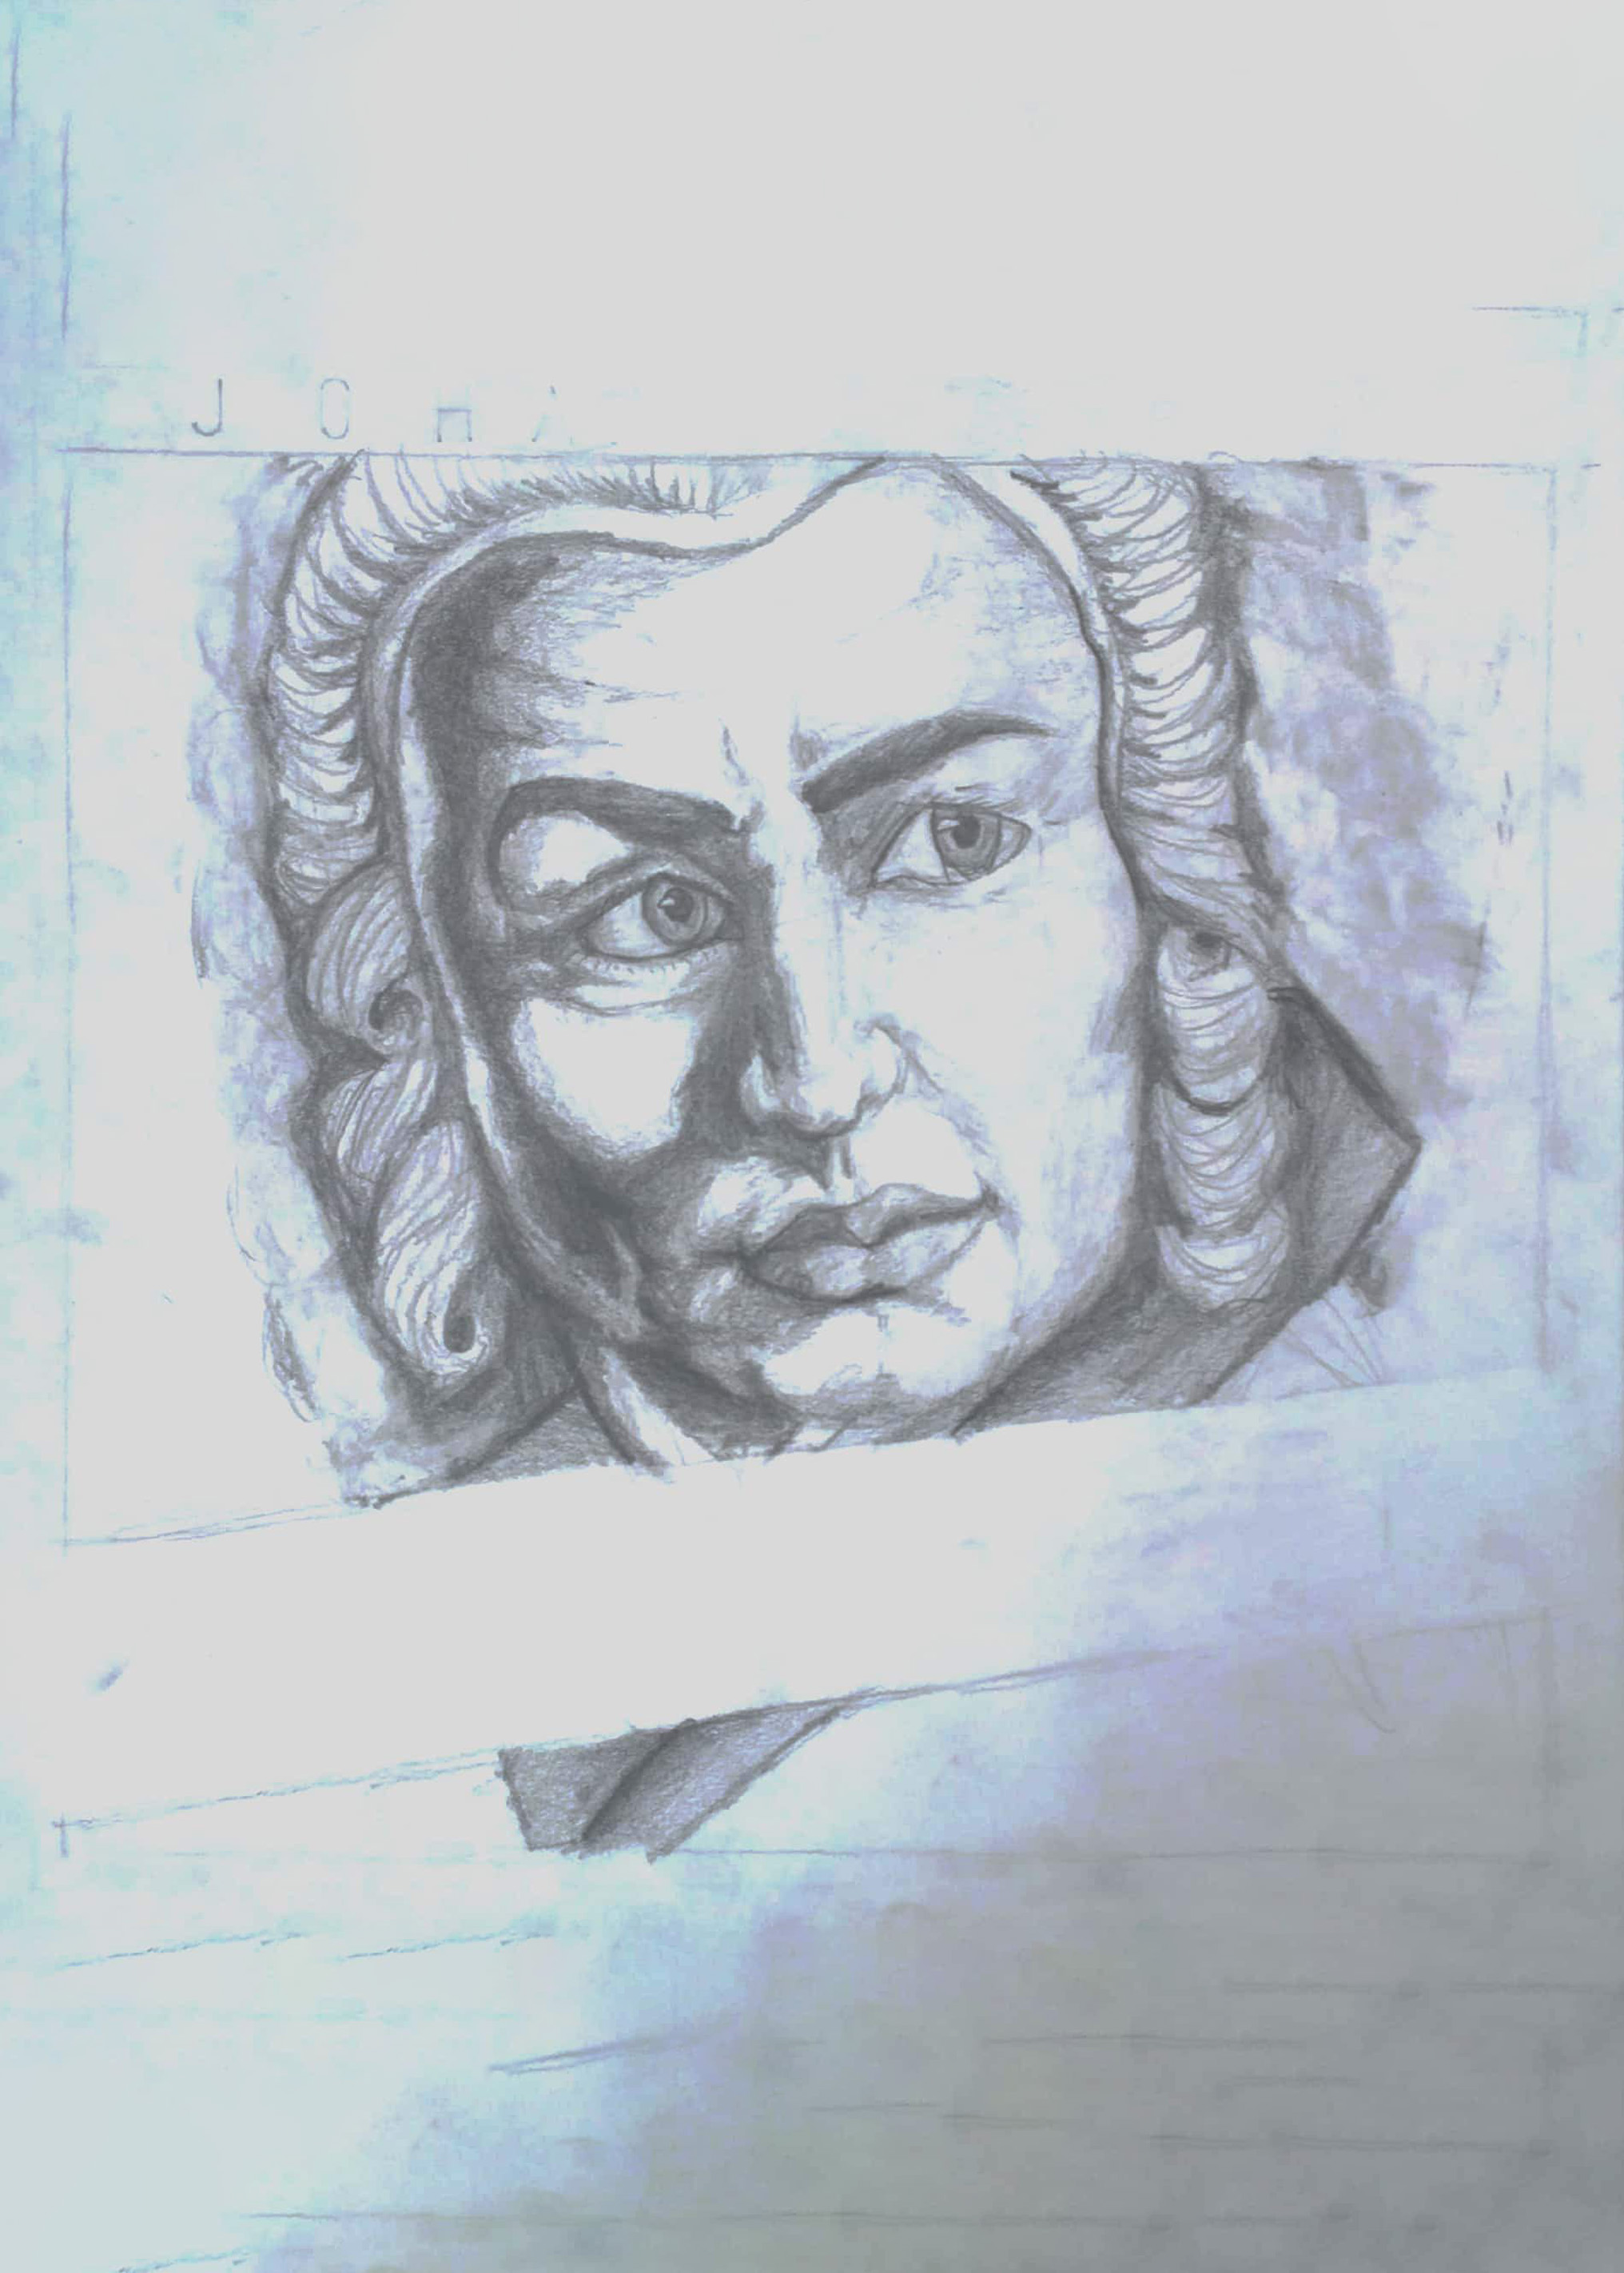 A portrait of Bach modeled after Justin Bieber's 'Believe' album cover.